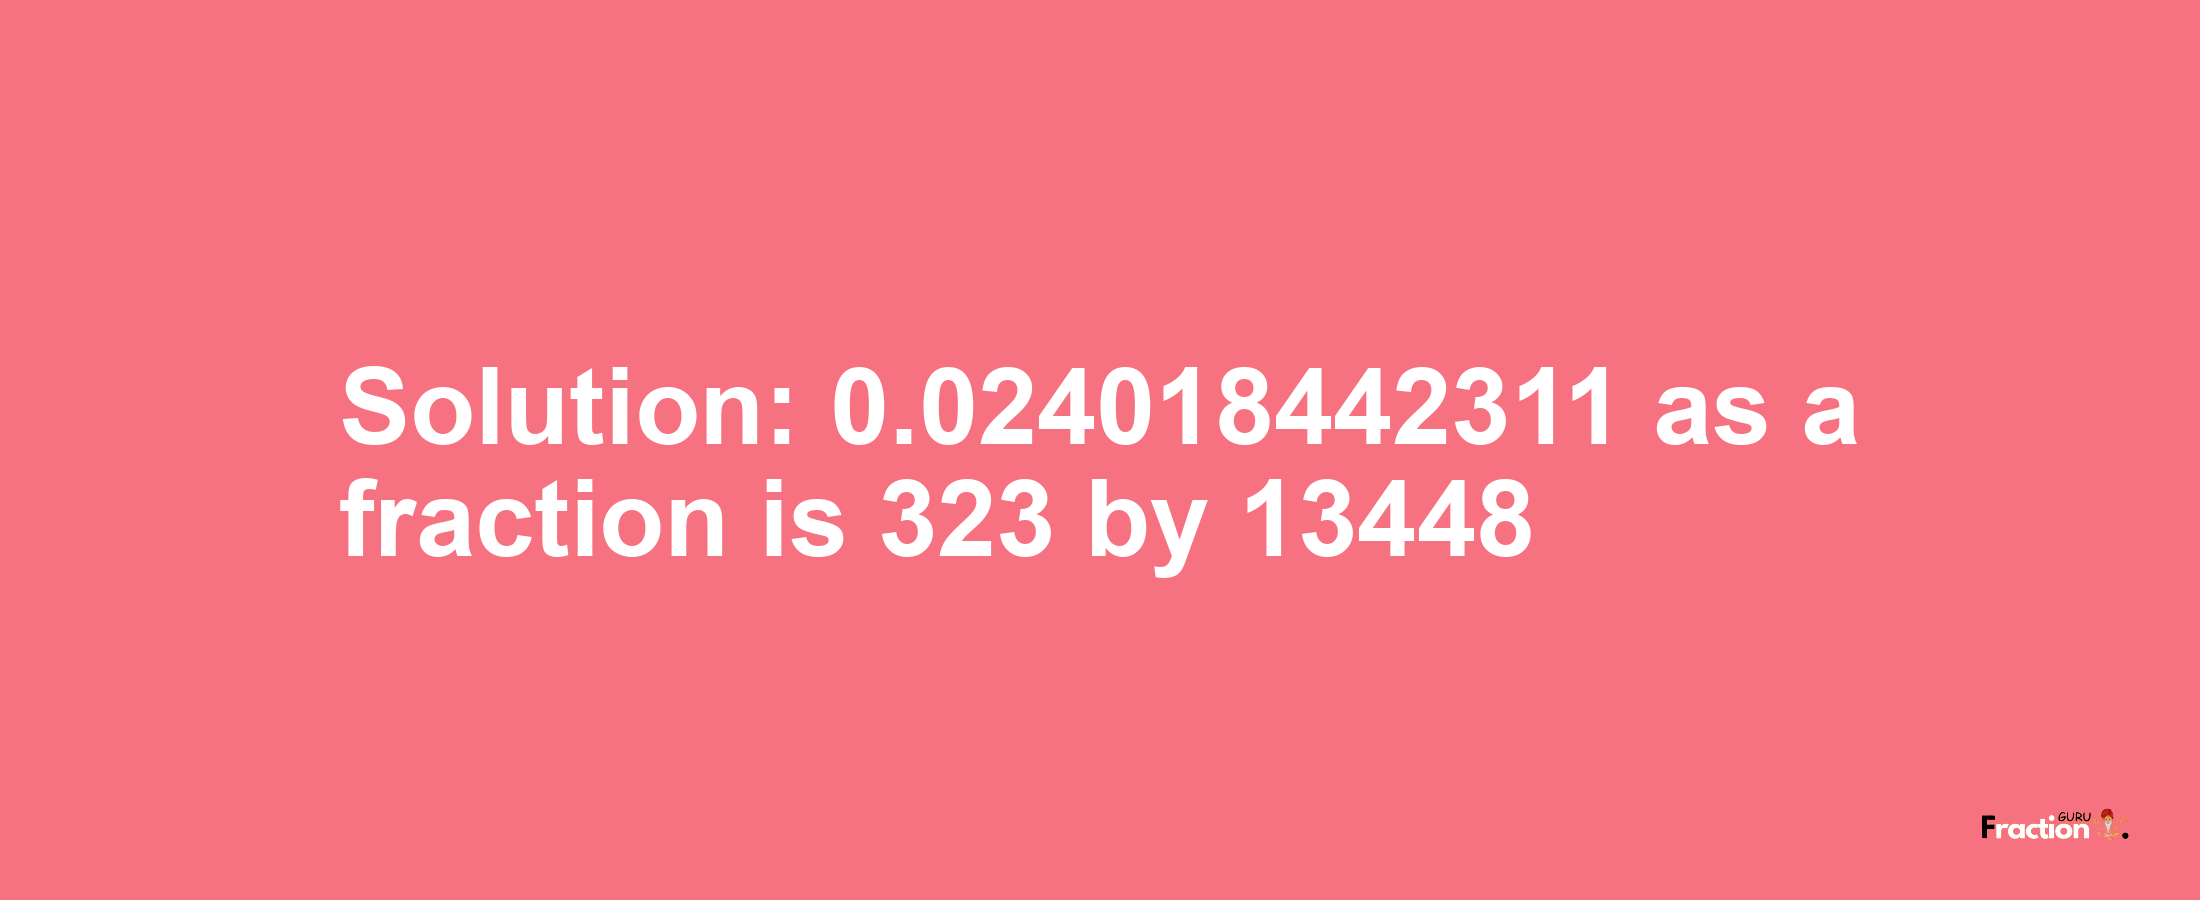 Solution:0.024018442311 as a fraction is 323/13448